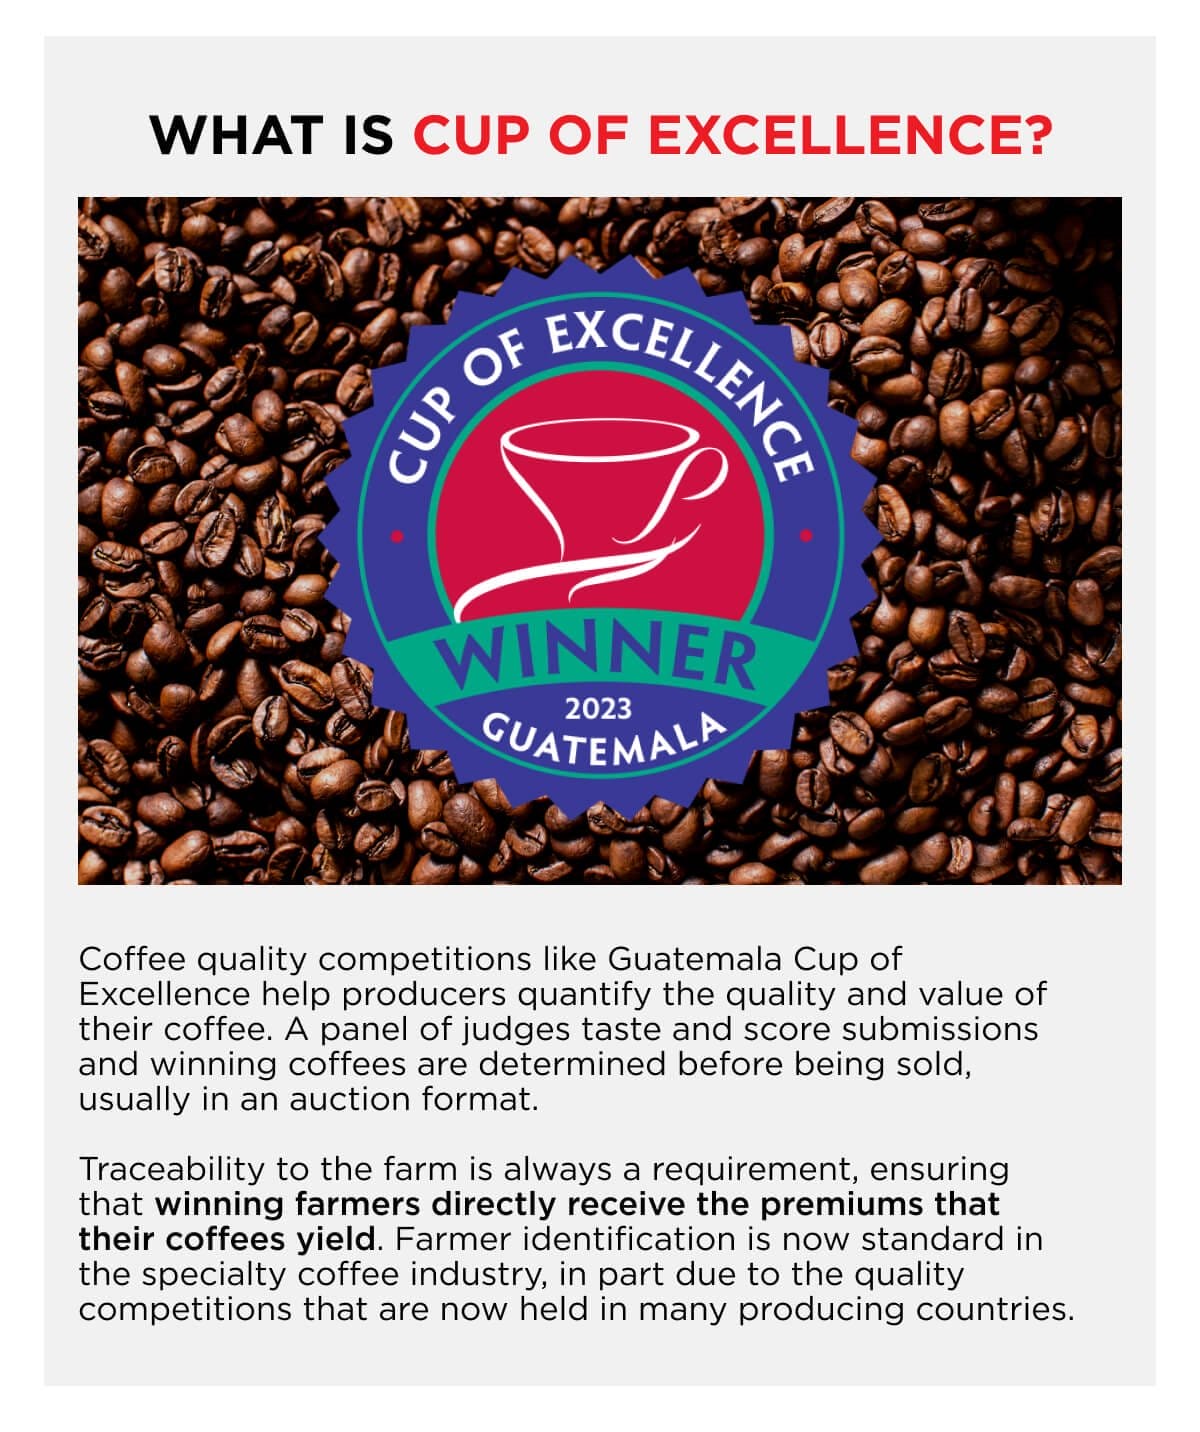 What is Cup of Excellence?